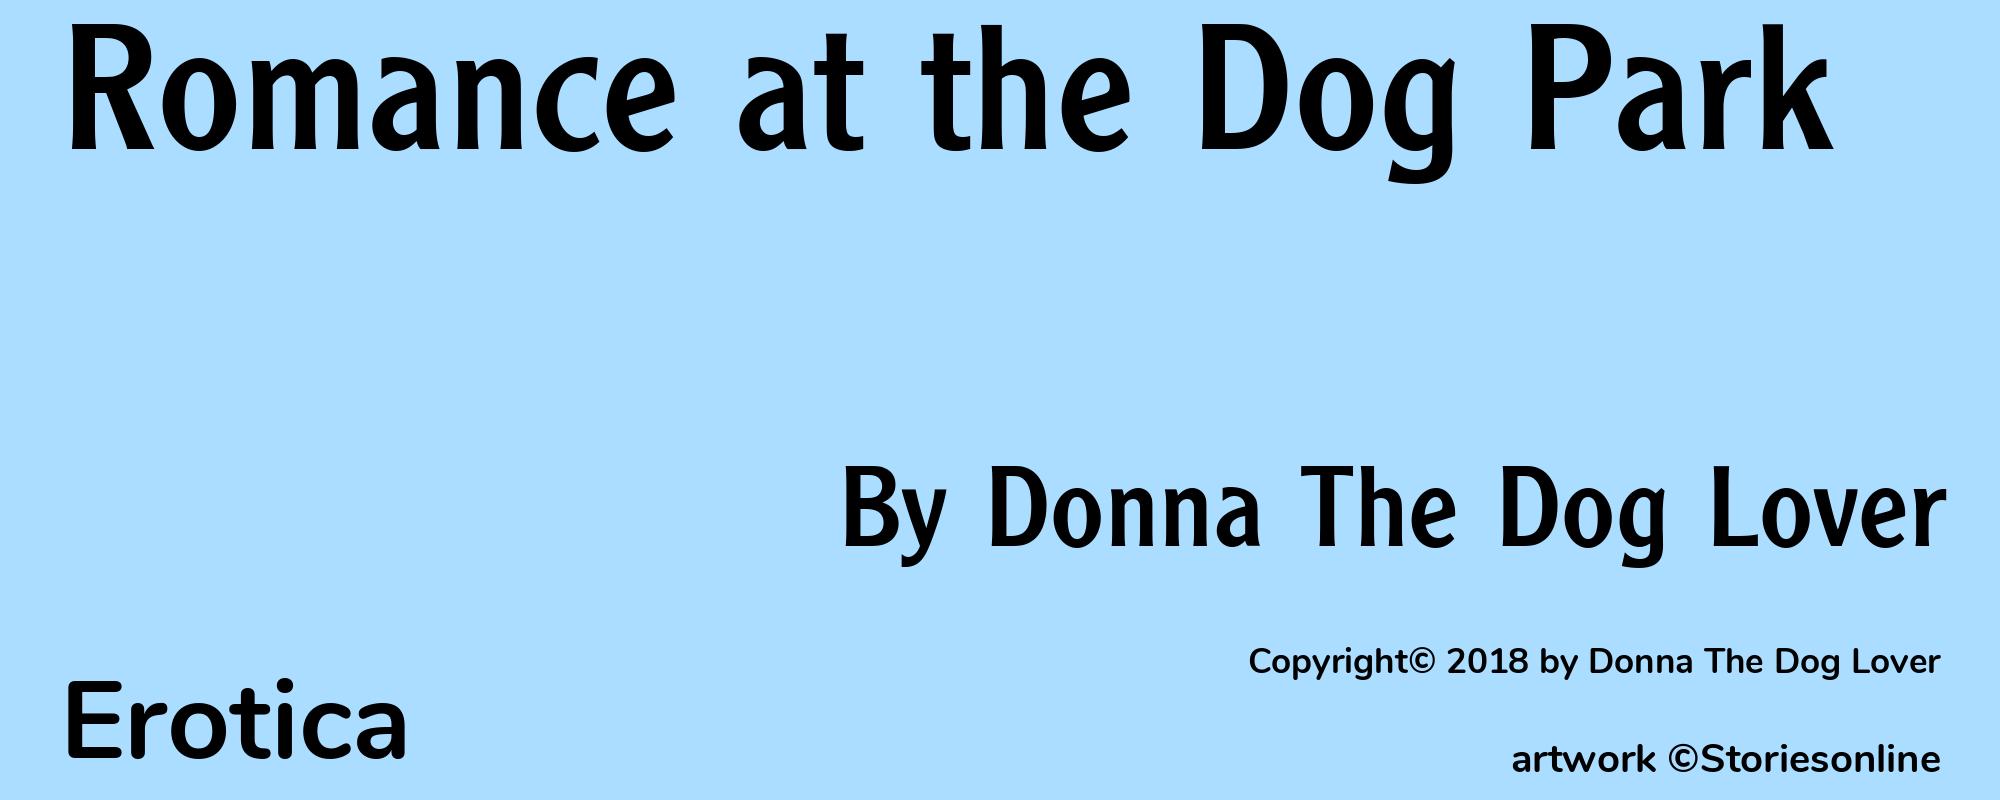 Romance at the Dog Park - Cover